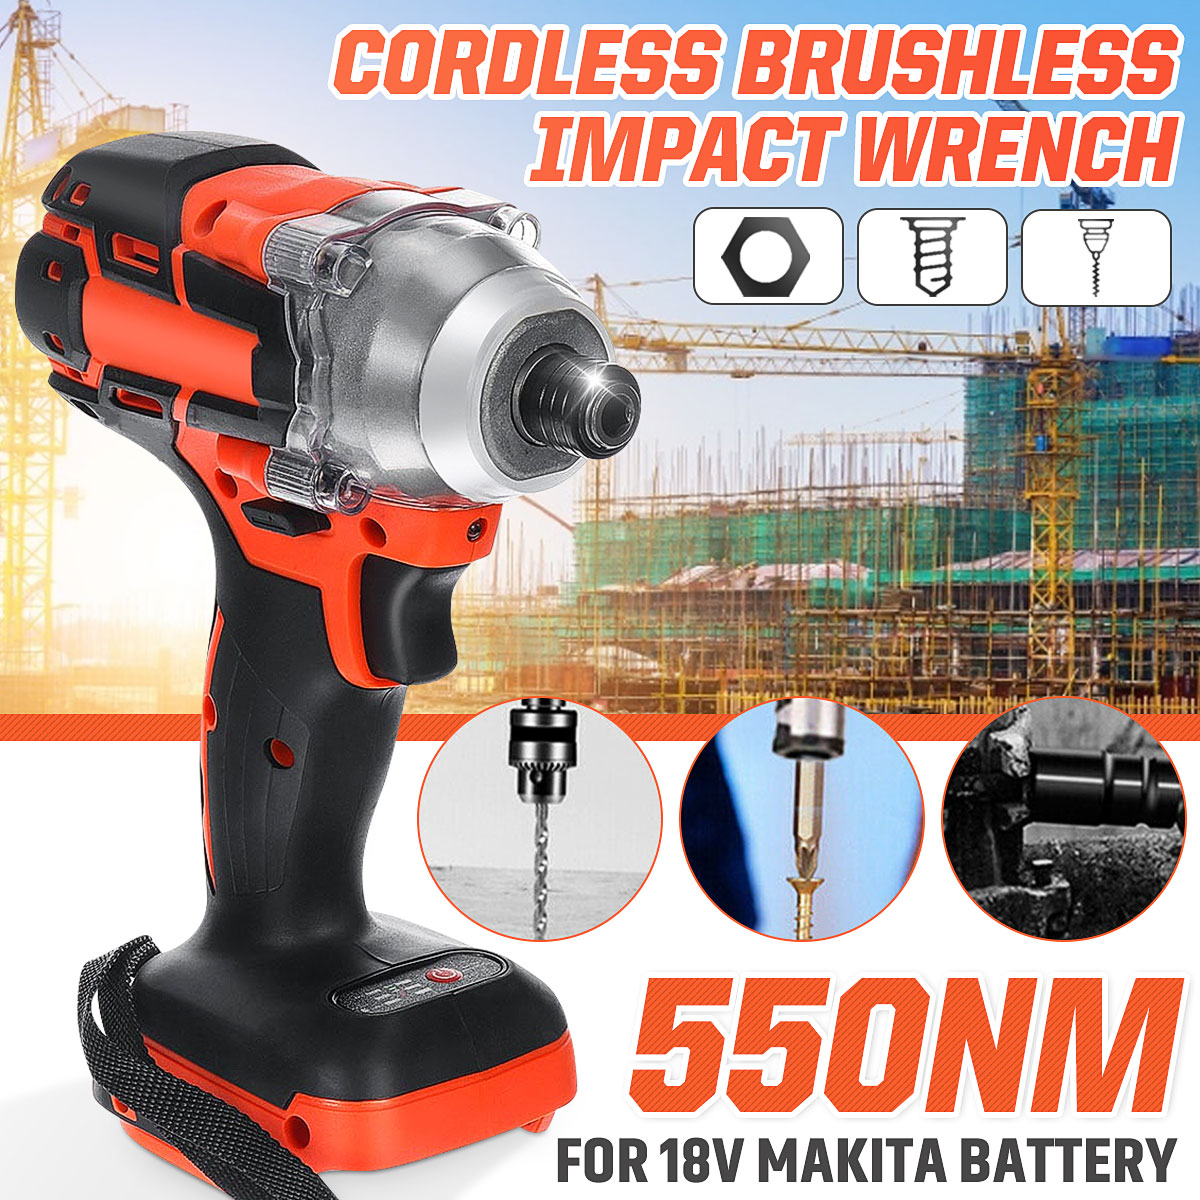 38quot-Brushless-Impact-Wrench-Cordless-550NM-High-Torque-For-Makita-18V-Battery-1789863-2